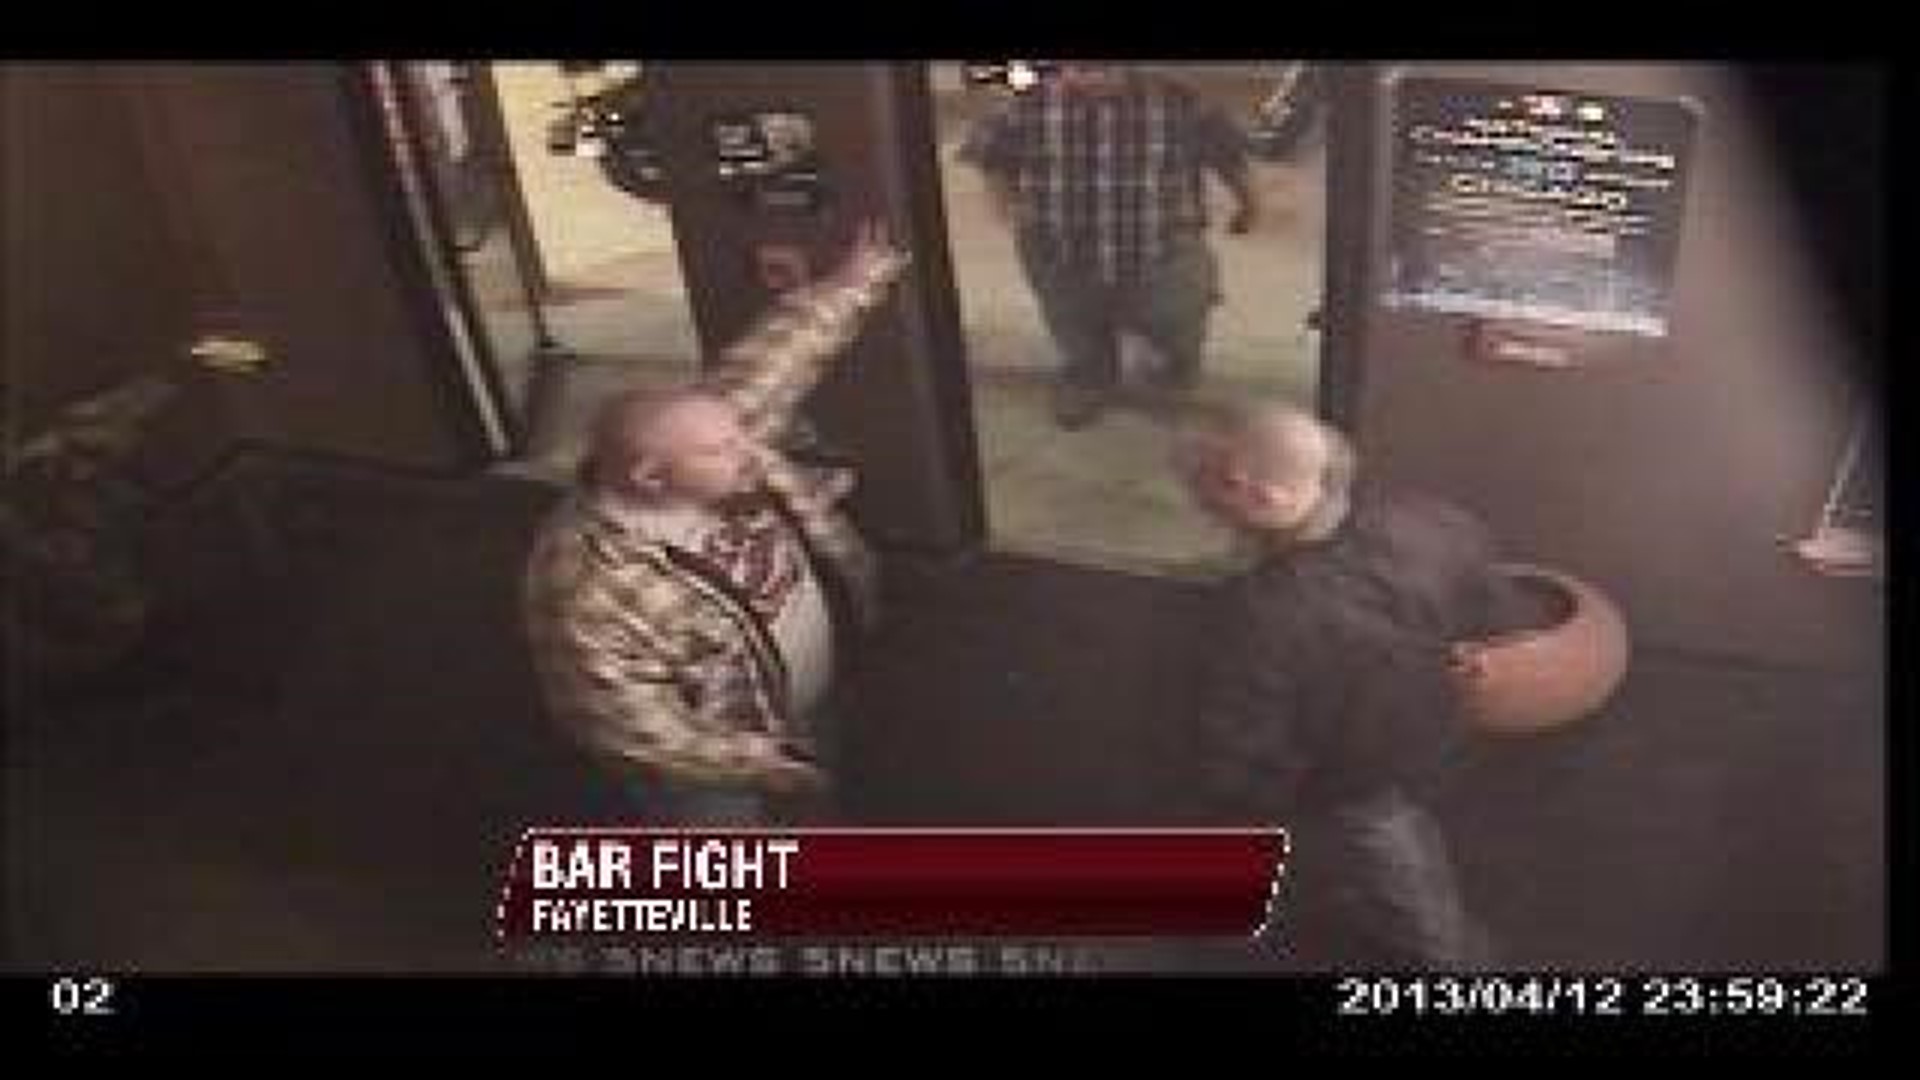 Two Police Officers on Leave after Bar fight